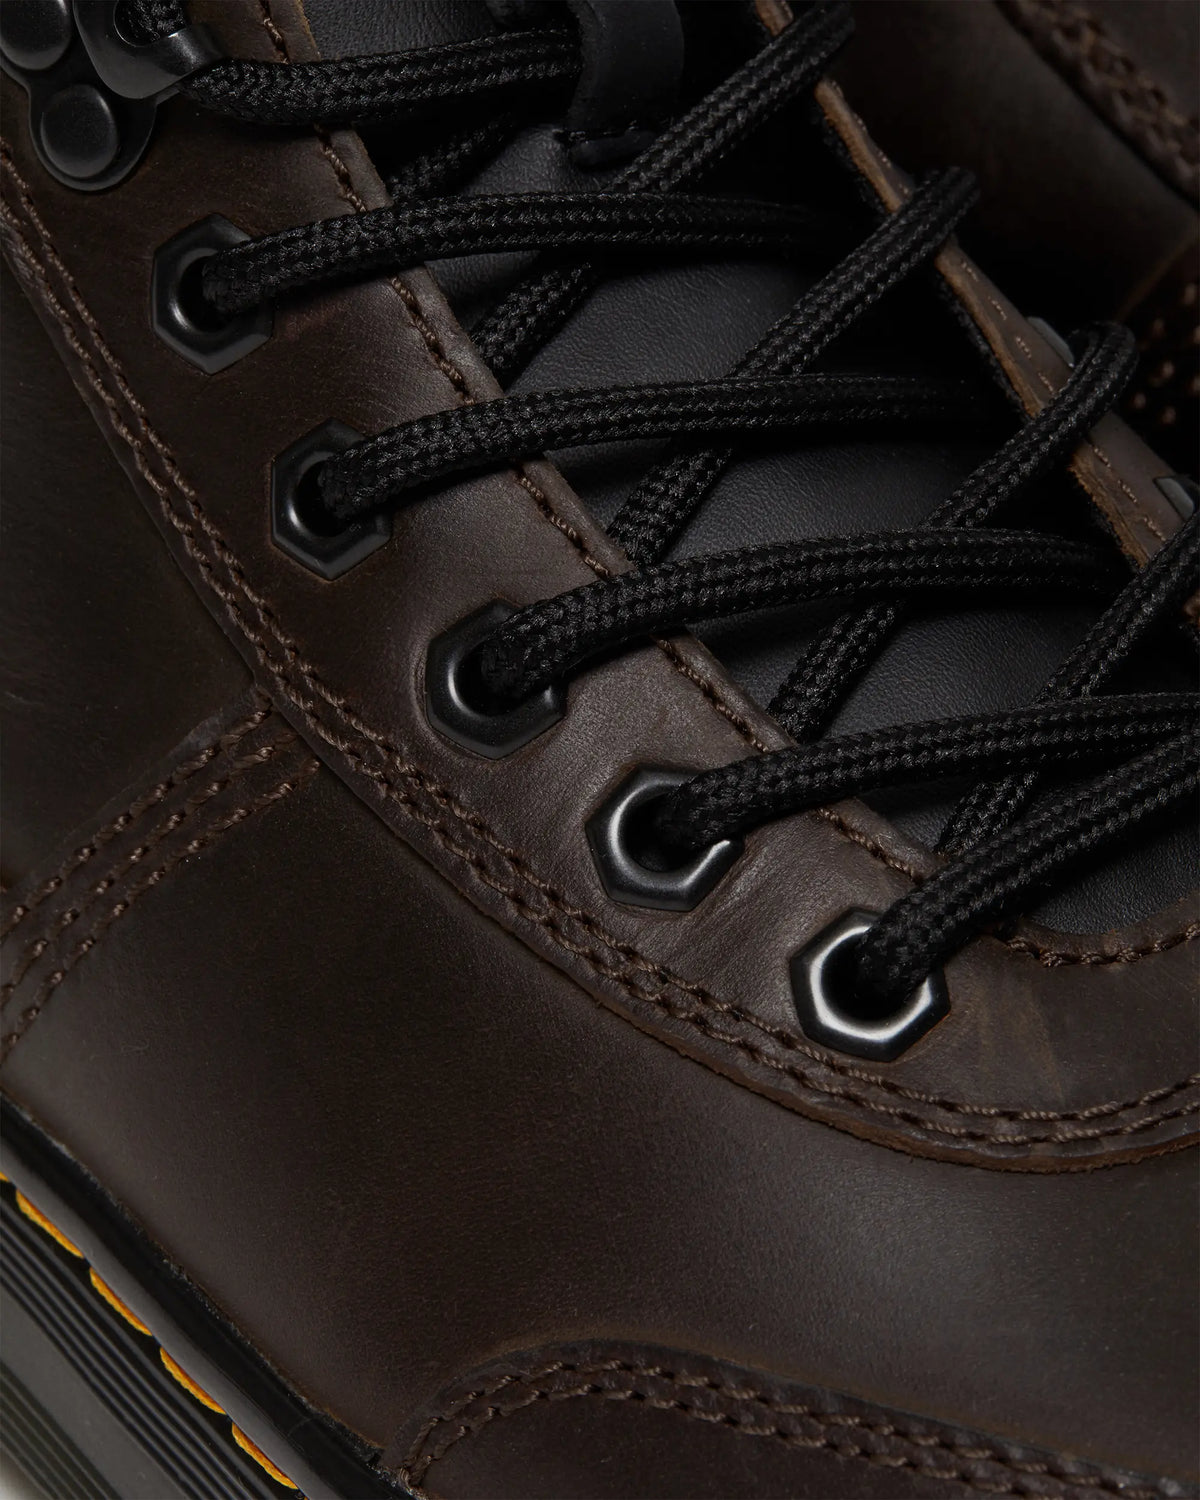 Dr. Martens, Combs Tech Leather Dark Brown Crazy Horse+Pu